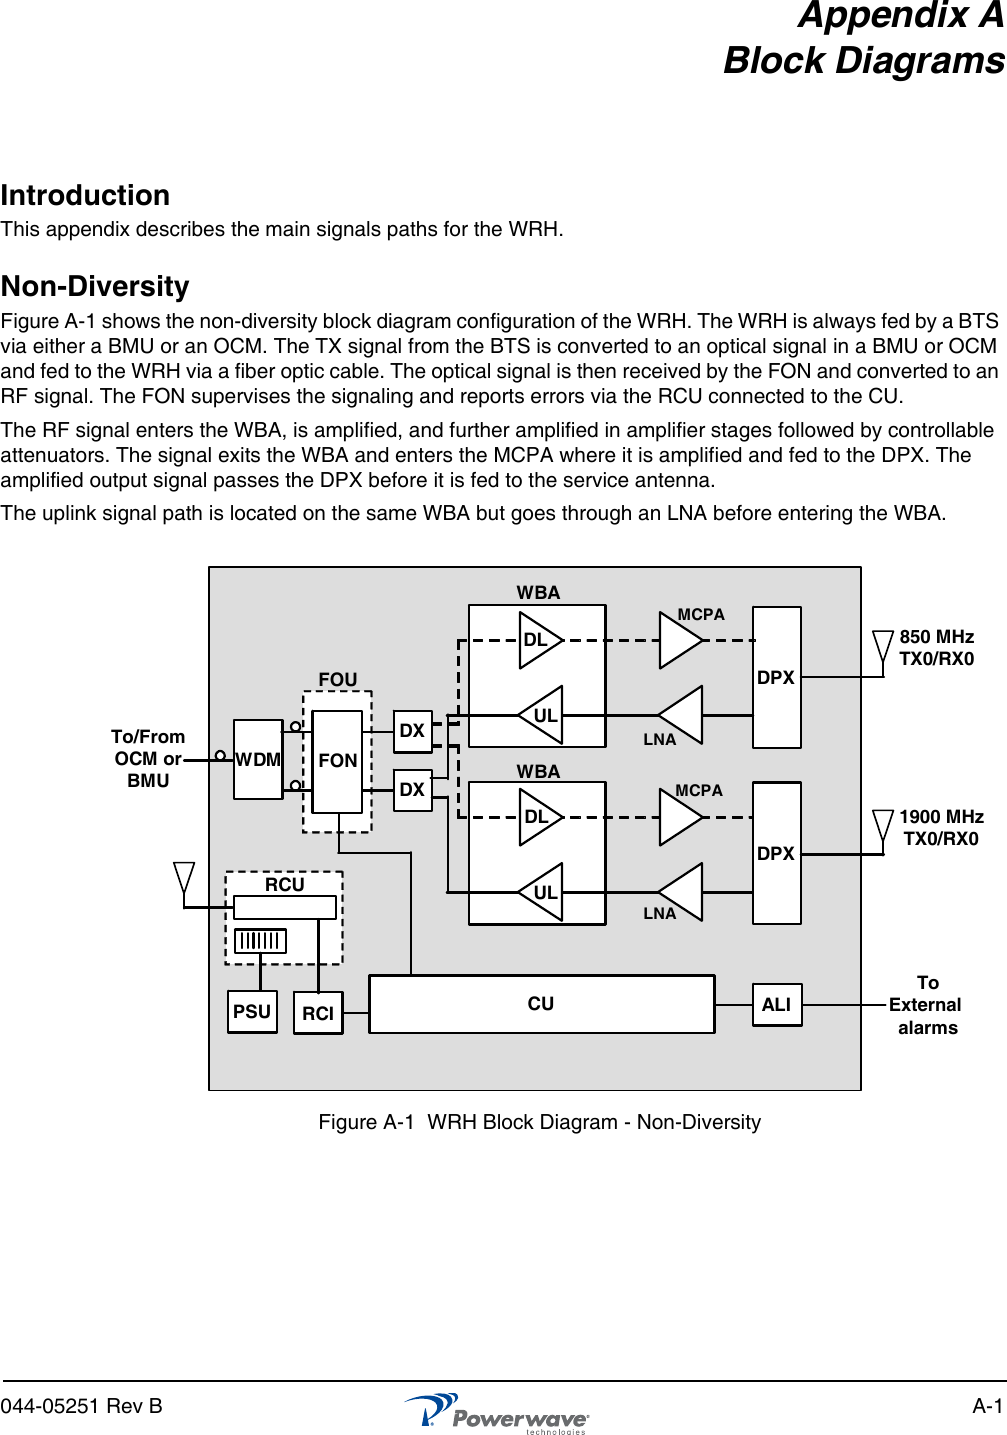 044-05251 Rev B A-1Appendix ABlock DiagramsIntroductionThis appendix describes the main signals paths for the WRH.Non-DiversityFigure A-1 shows the non-diversity block diagram configuration of the WRH. The WRH is always fed by a BTS via either a BMU or an OCM. The TX signal from the BTS is converted to an optical signal in a BMU or OCM and fed to the WRH via a fiber optic cable. The optical signal is then received by the FON and converted to an RF signal. The FON supervises the signaling and reports errors via the RCU connected to the CU.The RF signal enters the WBA, is amplified, and further amplified in amplifier stages followed by controllable attenuators. The signal exits the WBA and enters the MCPA where it is amplified and fed to the DPX. The amplified output signal passes the DPX before it is fed to the service antenna.The uplink signal path is located on the same WBA but goes through an LNA before entering the WBA.Figure A-1  WRH Block Diagram - Non-DiversityWDMFOUDXDXDPXDPXWBAWBADLDLULULLNALNAMCPAMCPATo/FromOCM orBMURCURCIPSU CUFONALIToExternal alarms850 MHzTX0/RX01900 MHzTX0/RX0